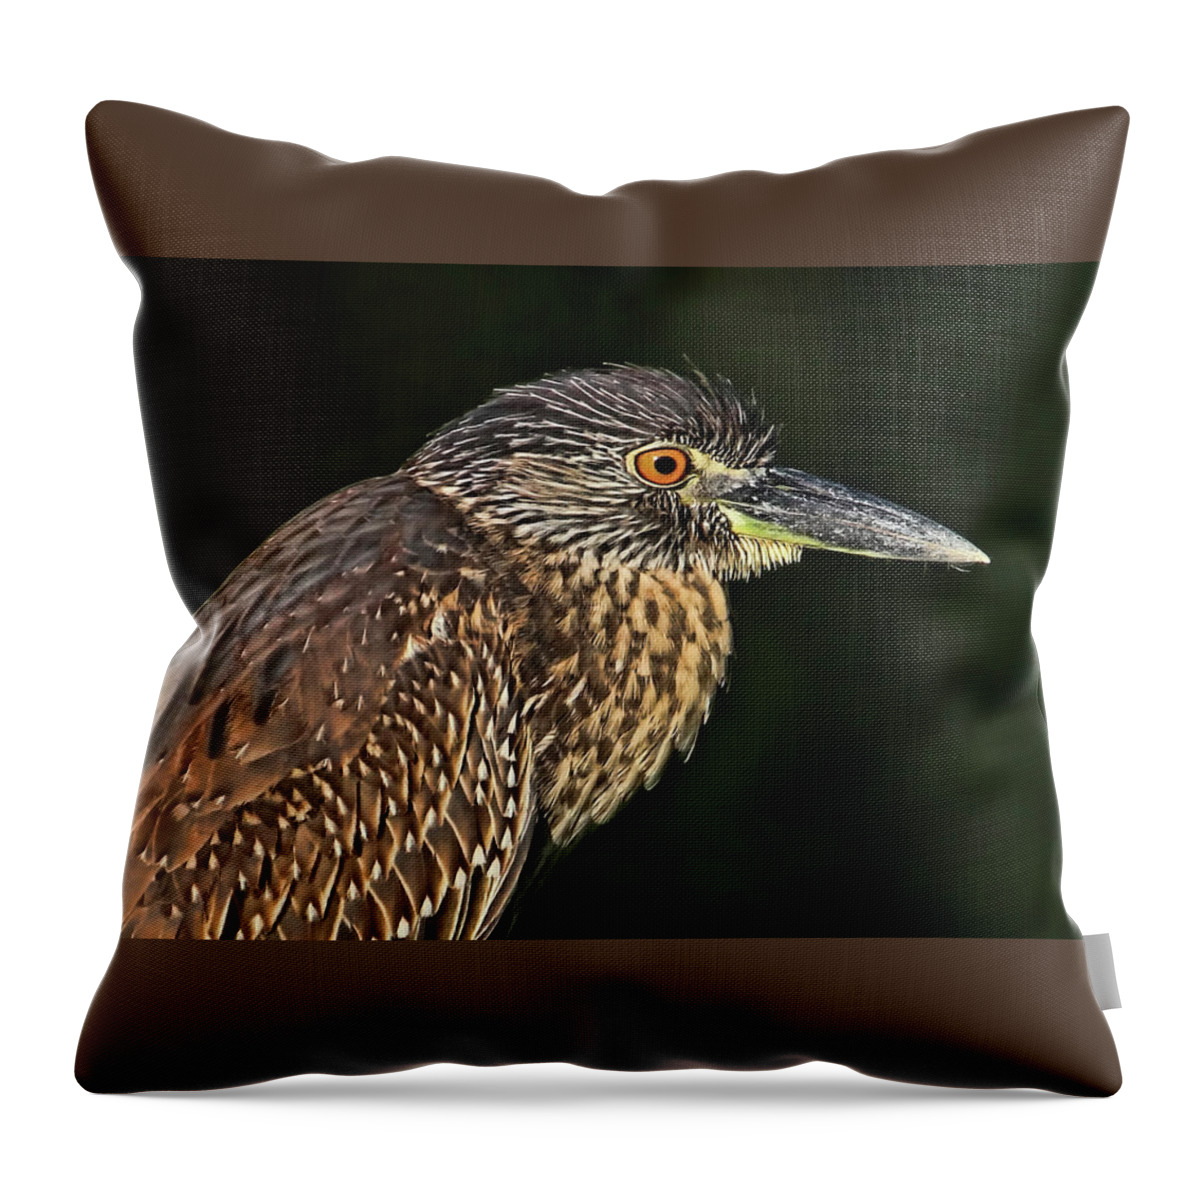 Yellow-crowned Night Heron Throw Pillow featuring the photograph Baby Face - Yellow-crowned Night Heron by HH Photography of Florida